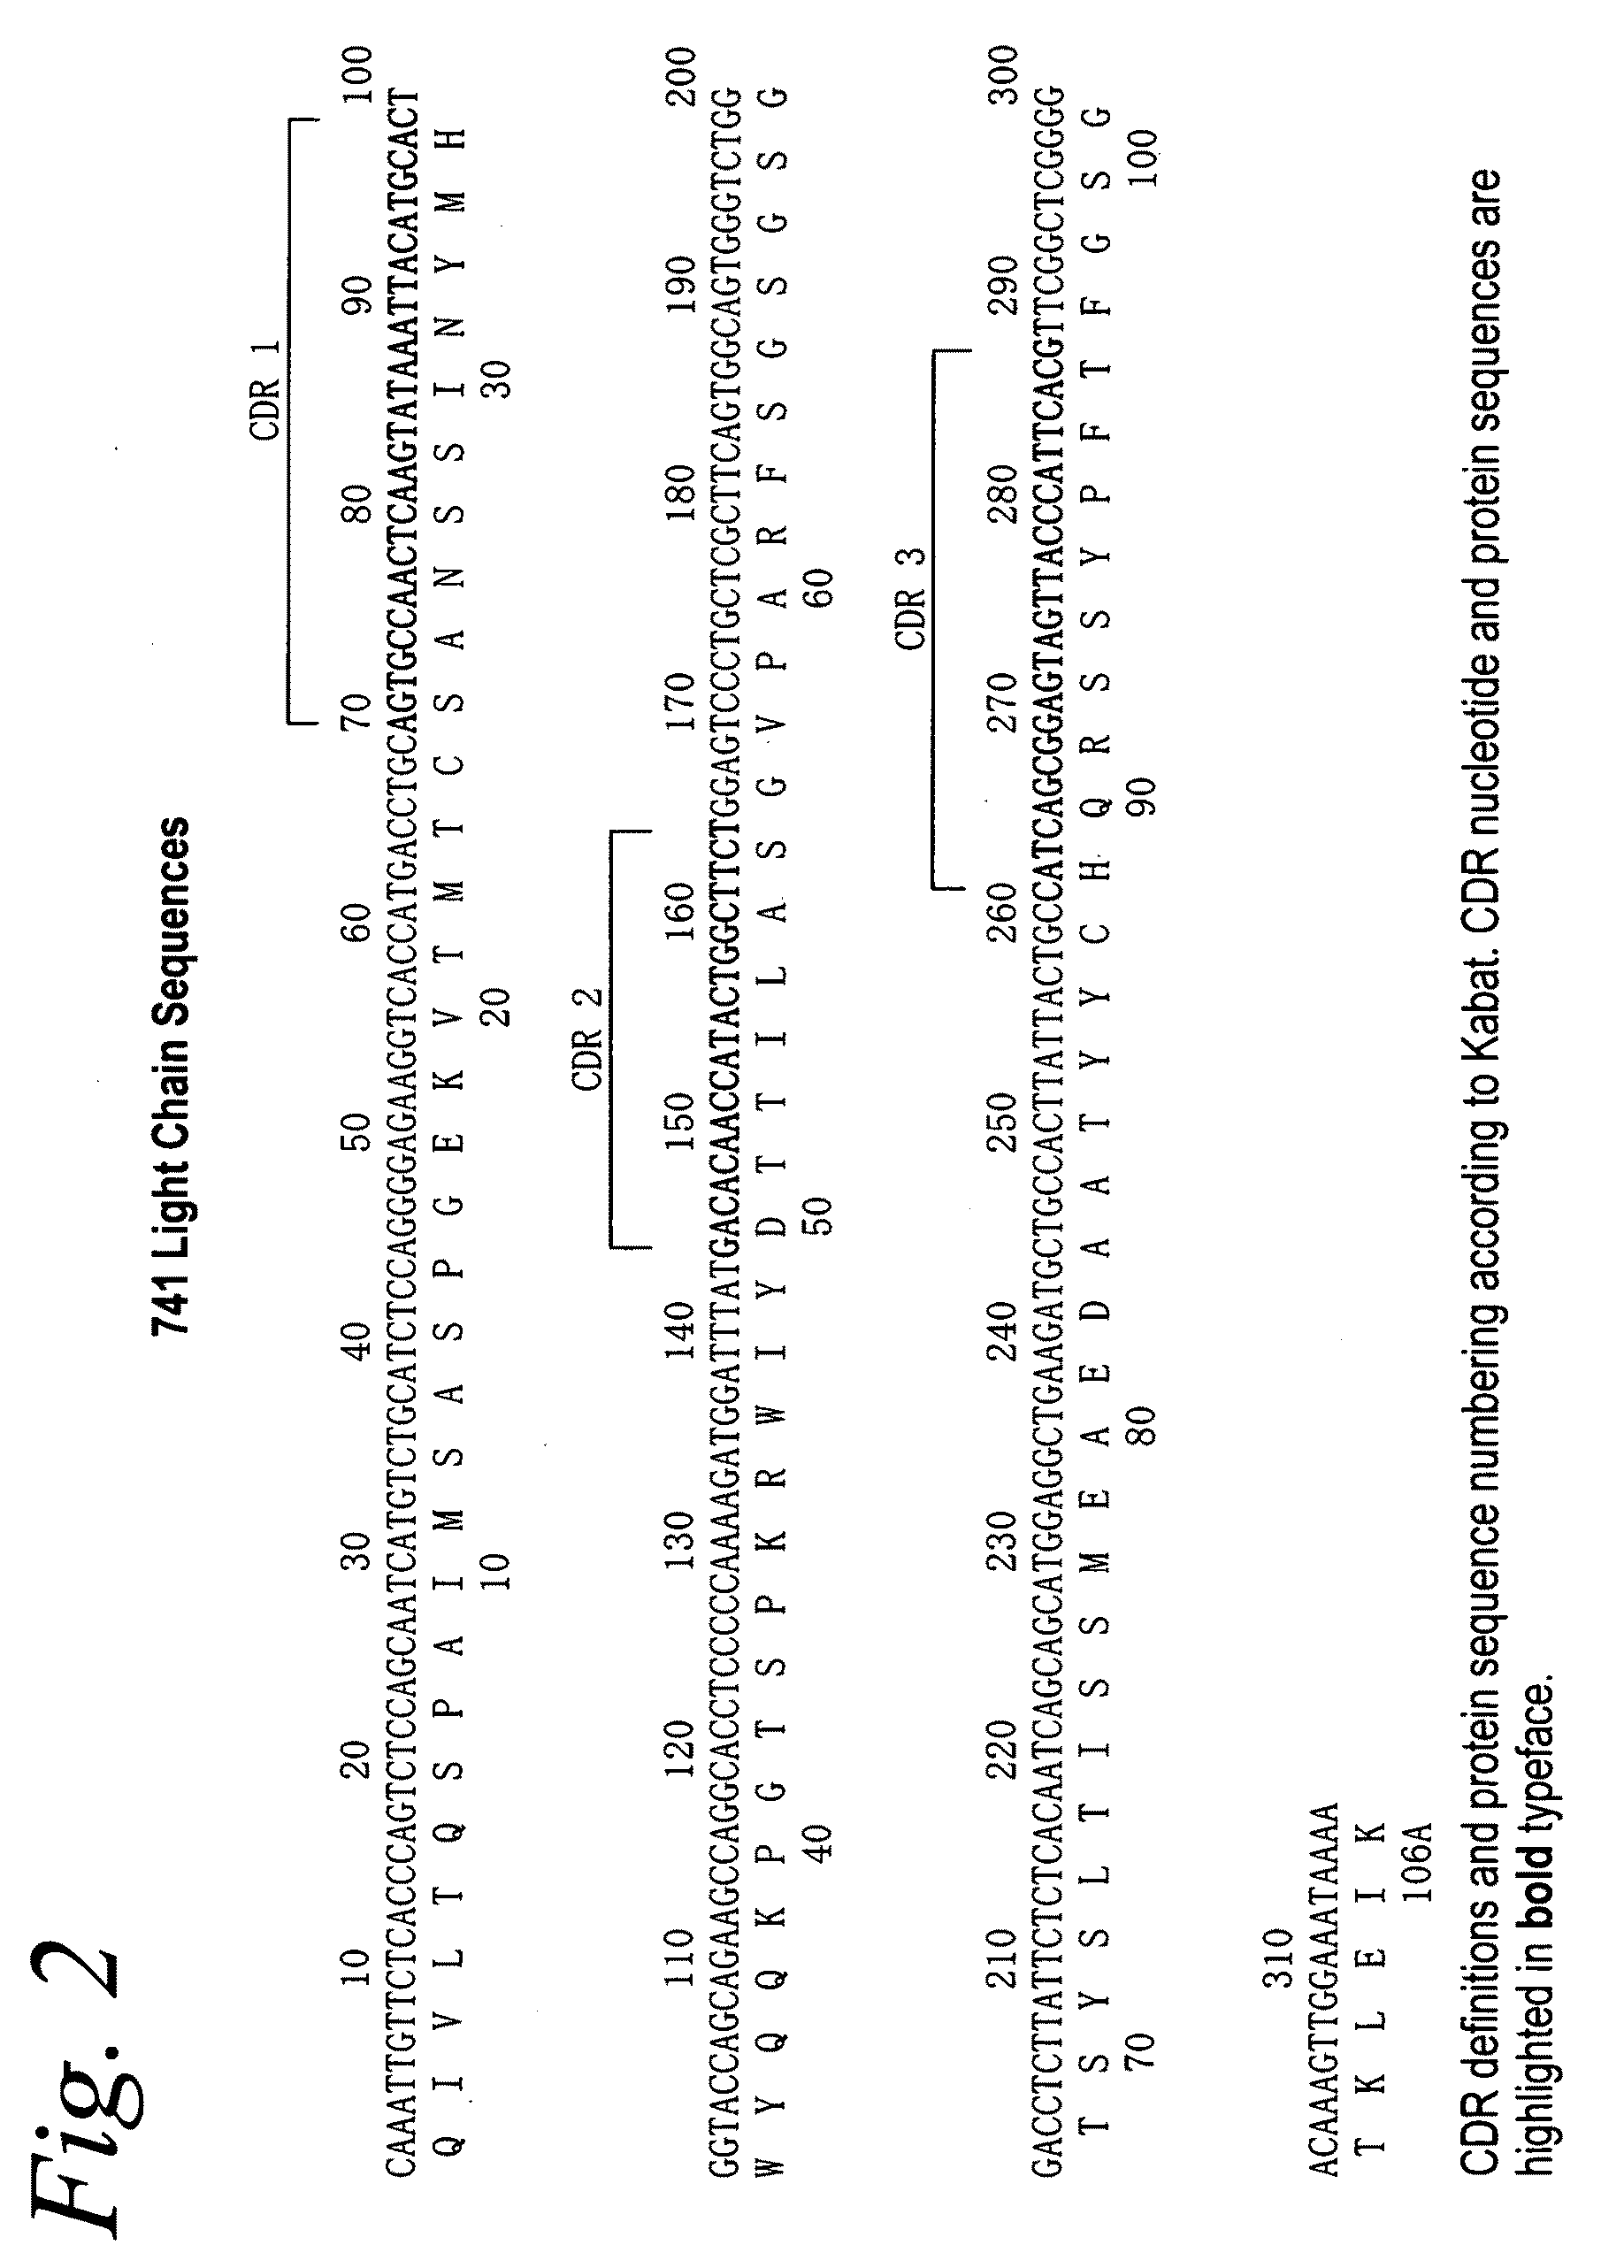 Antibodies against flagellin and uses thereof